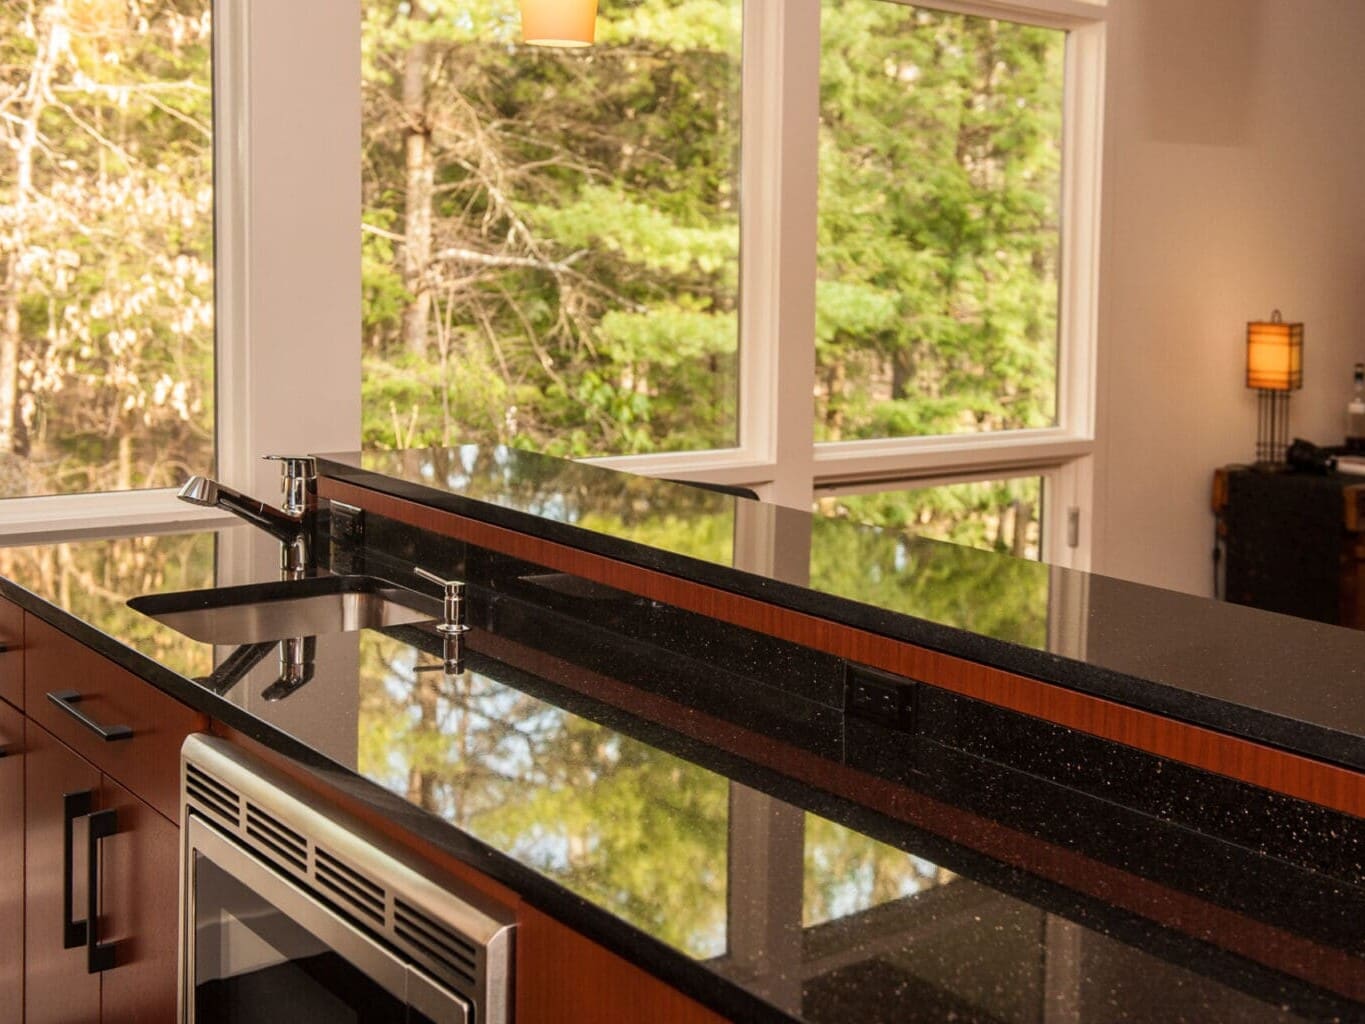 A photo of a mid-century modern kitchen island with black stone countertops, stainless steel appliances, black hardware, and floor-to-ceiling windows.